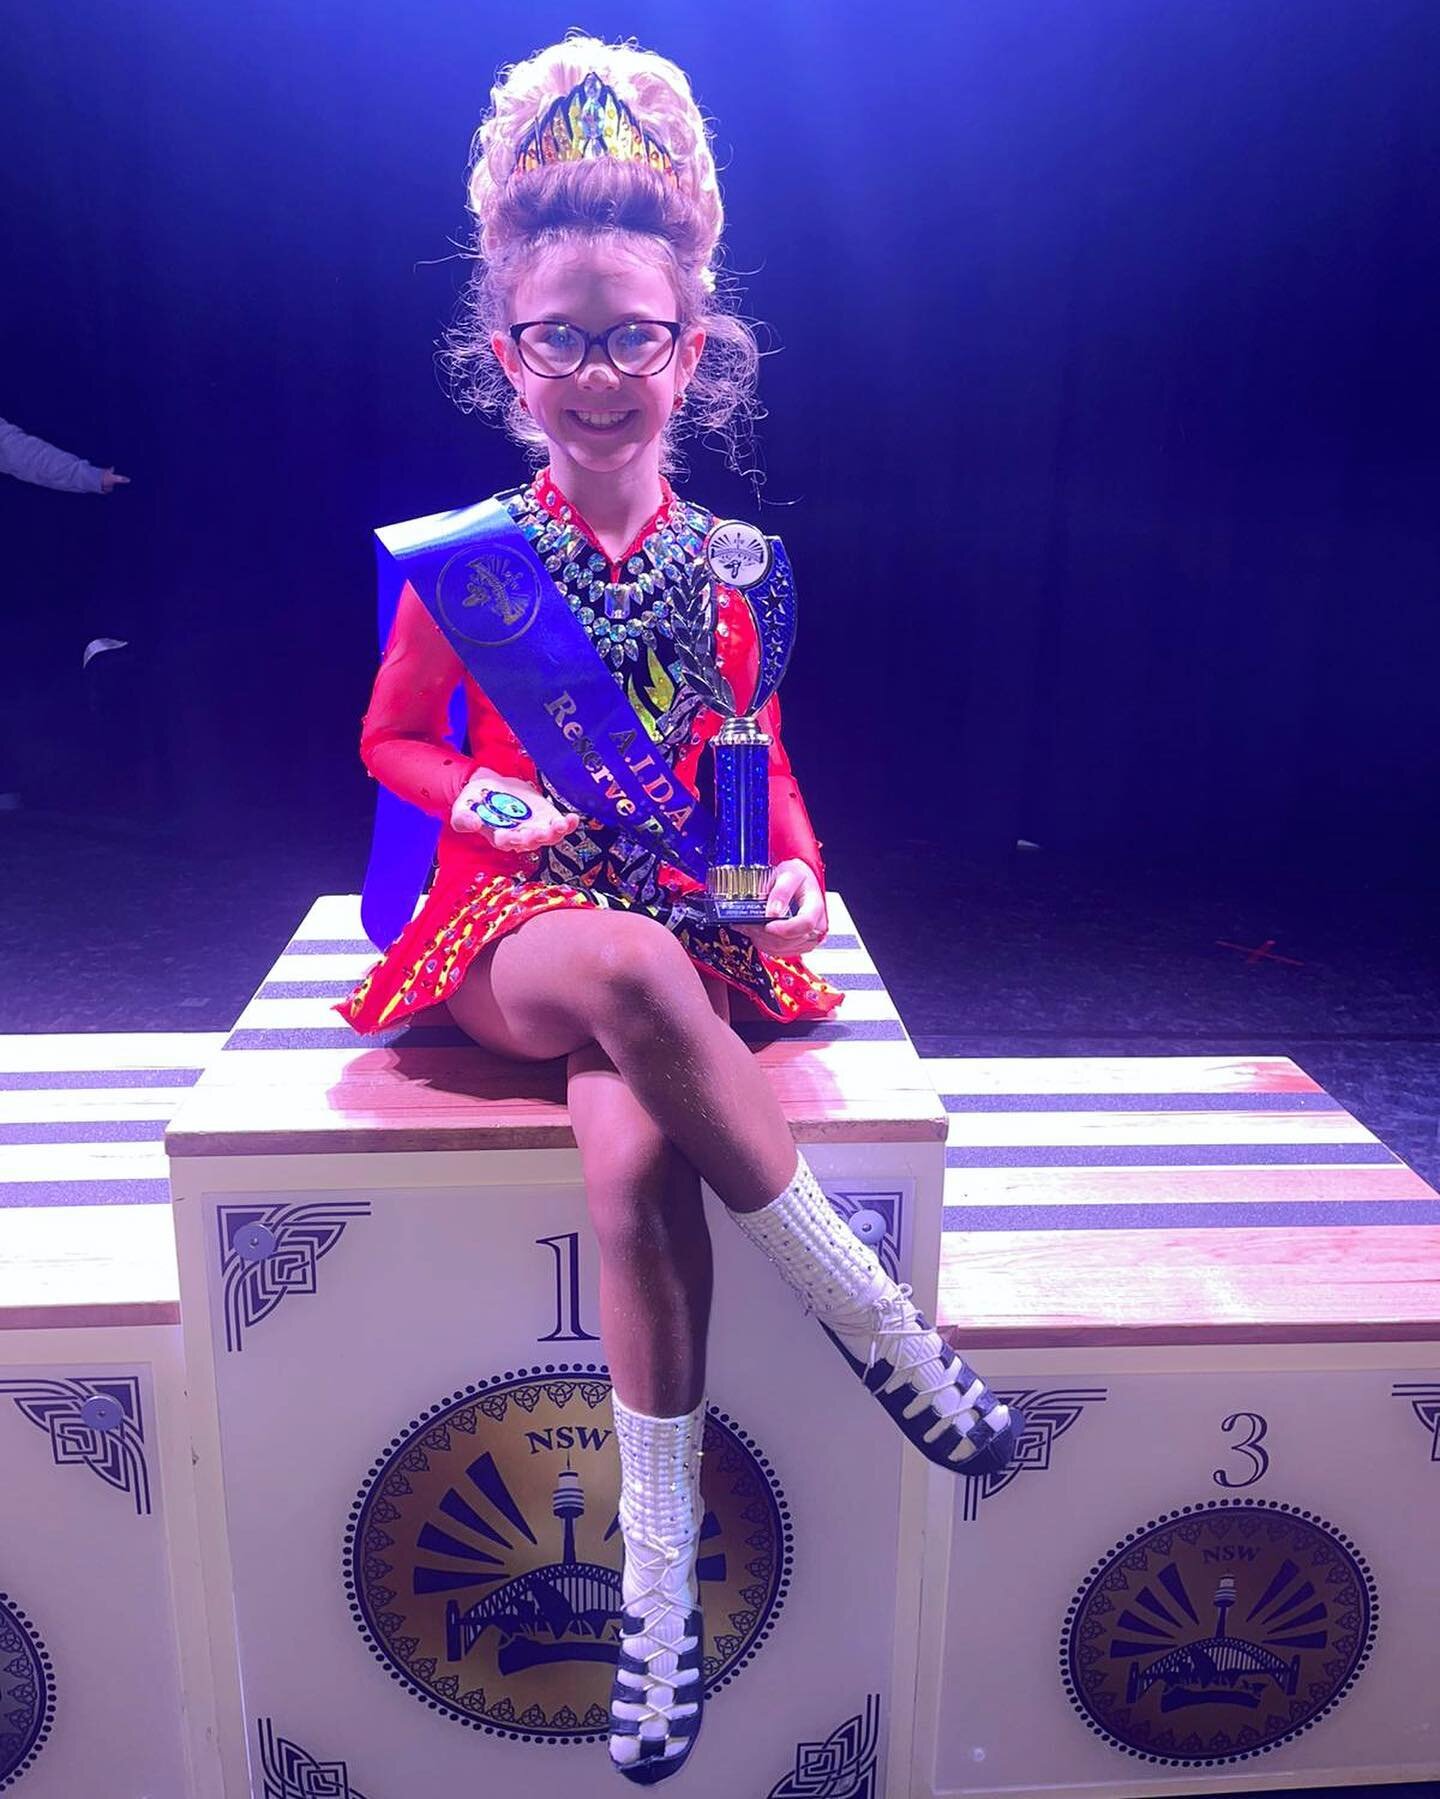 Wow what a massive day at the AIDA Reserve Feis 🤩 Too many exciting moments to mention them all, but some highlights:

🏆 Sadbh - 1st in Premiership 
🏆 Claire - 2nd in Premiership
🏆 Olive - 5th in Premiership
🏆 Lucy - 7th in Premiership
🏆 Harper